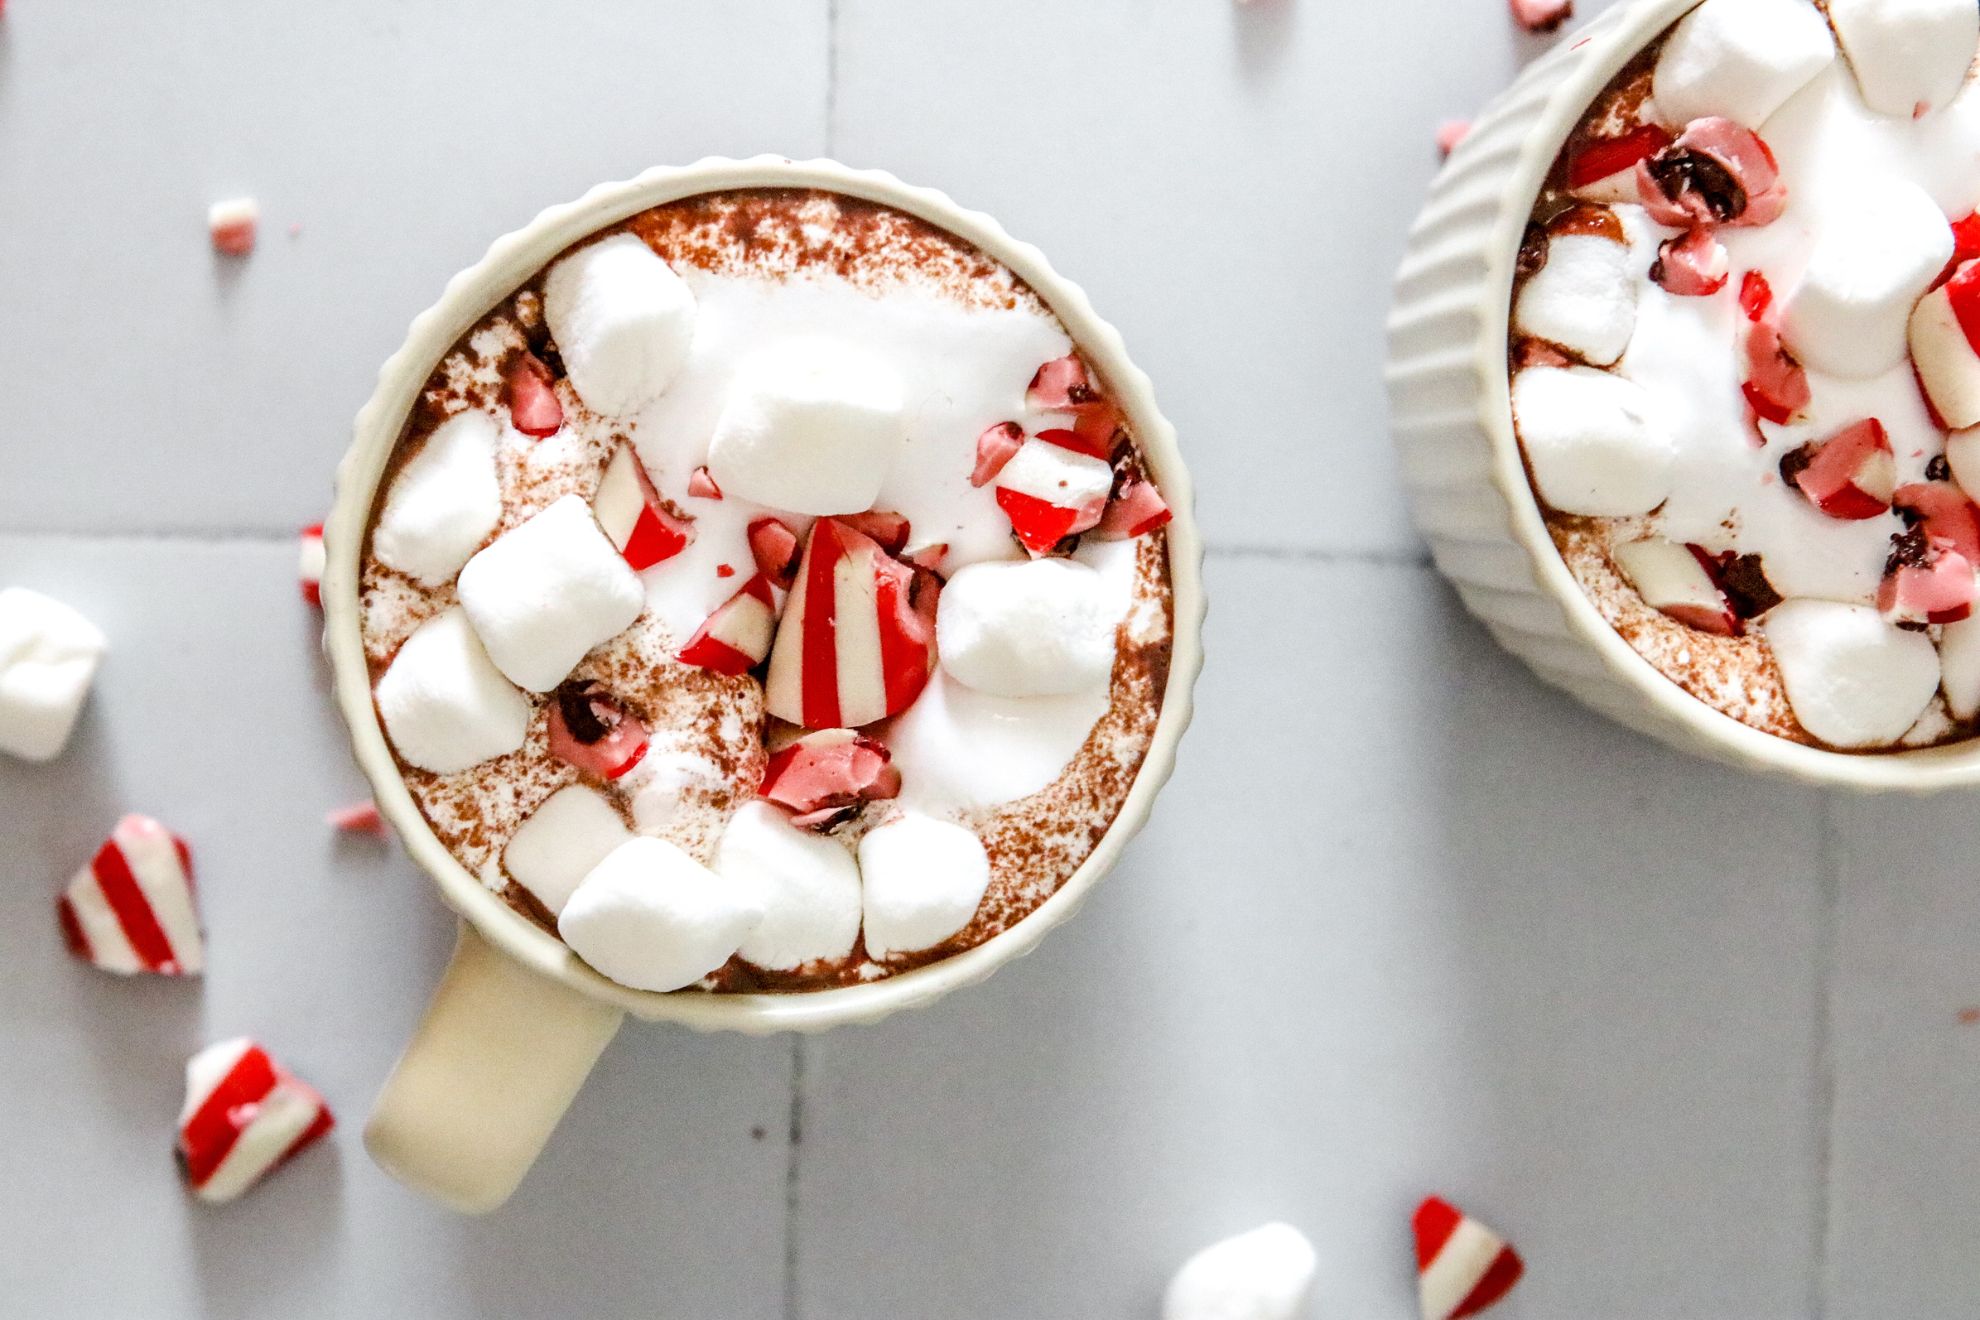 This is an overhead horizontal image of two mugs sitting on a white square tile surface. The image focuses on one mug and another mug is in the top right corner of the image. In the mug is fluff, mini marshmallows and crushed candy canes. More crushed candy canes and mini marshmallows are scattered around the mugs.